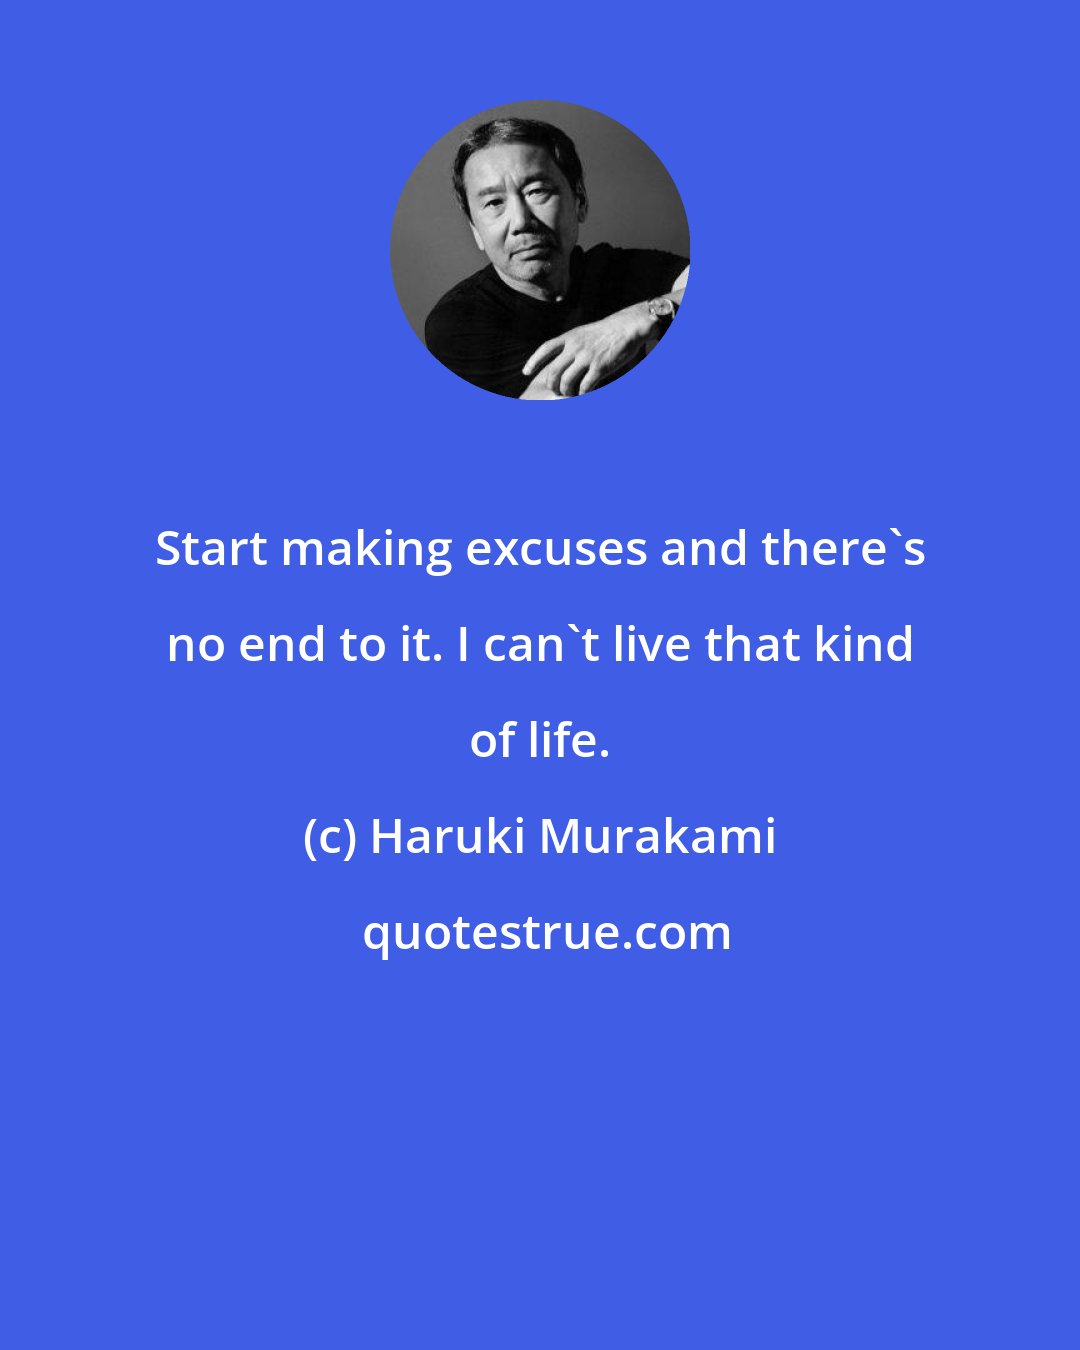 Haruki Murakami: Start making excuses and there's no end to it. I can't live that kind of life.